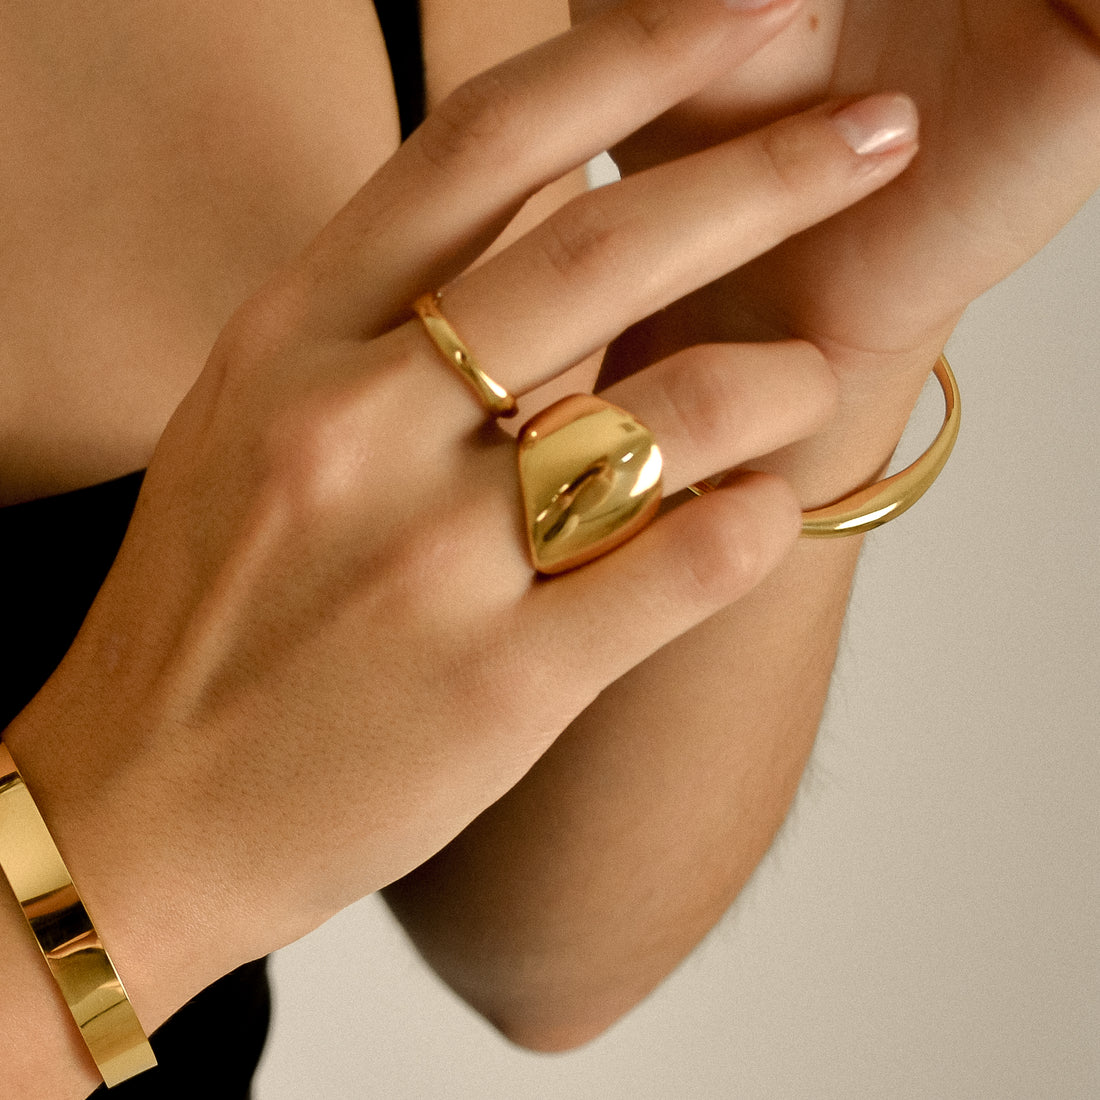 Rebellious Grace showcasing their new jewellery featuring chunky gold stacking rings of model